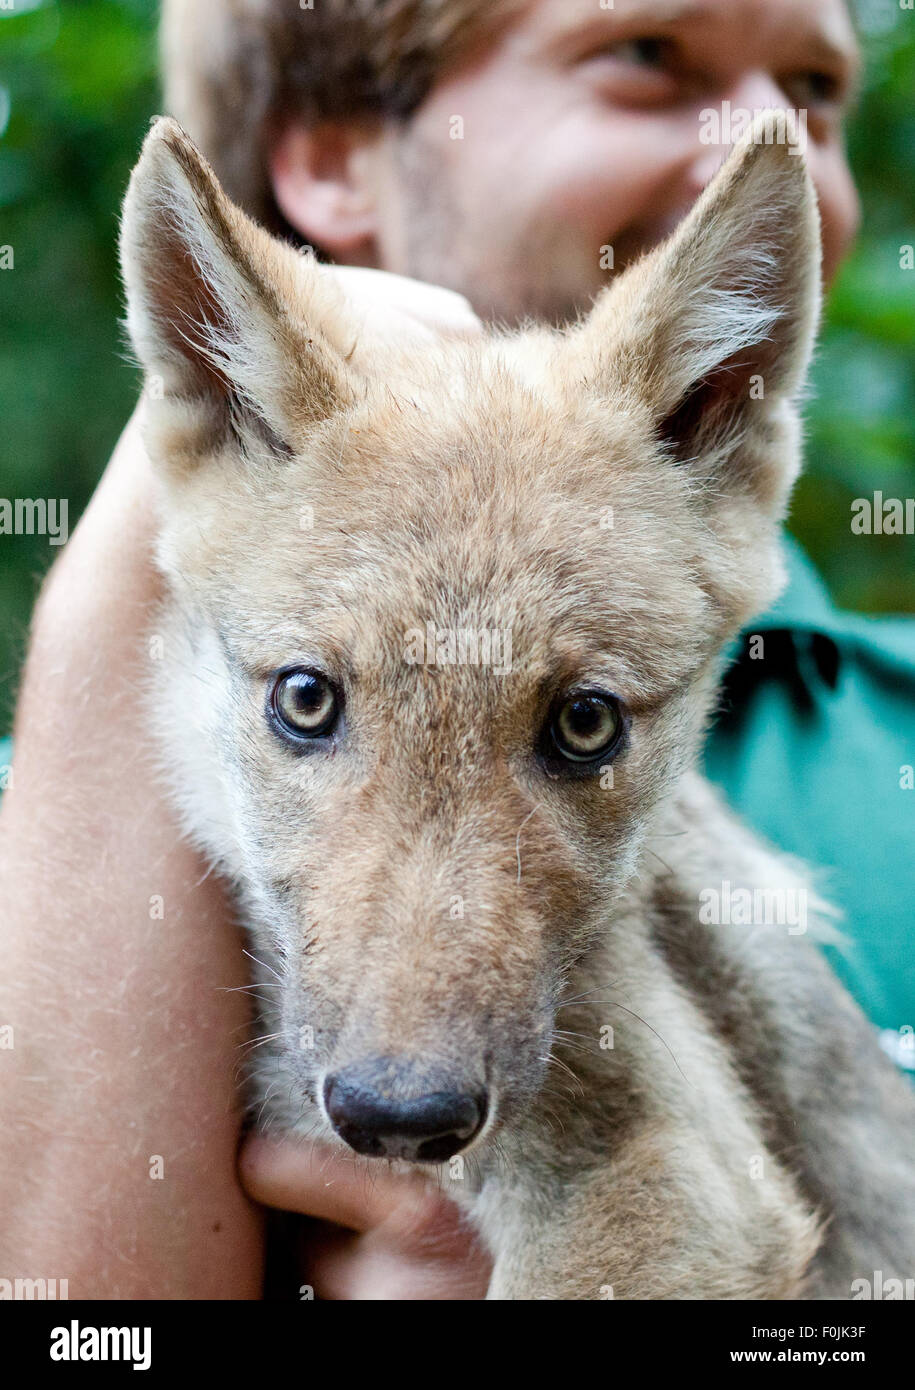 Download preview image - hanau-germany-17th-aug-2015-veterinarian-elias-bauer-holds-a-wolf-F0JK3F